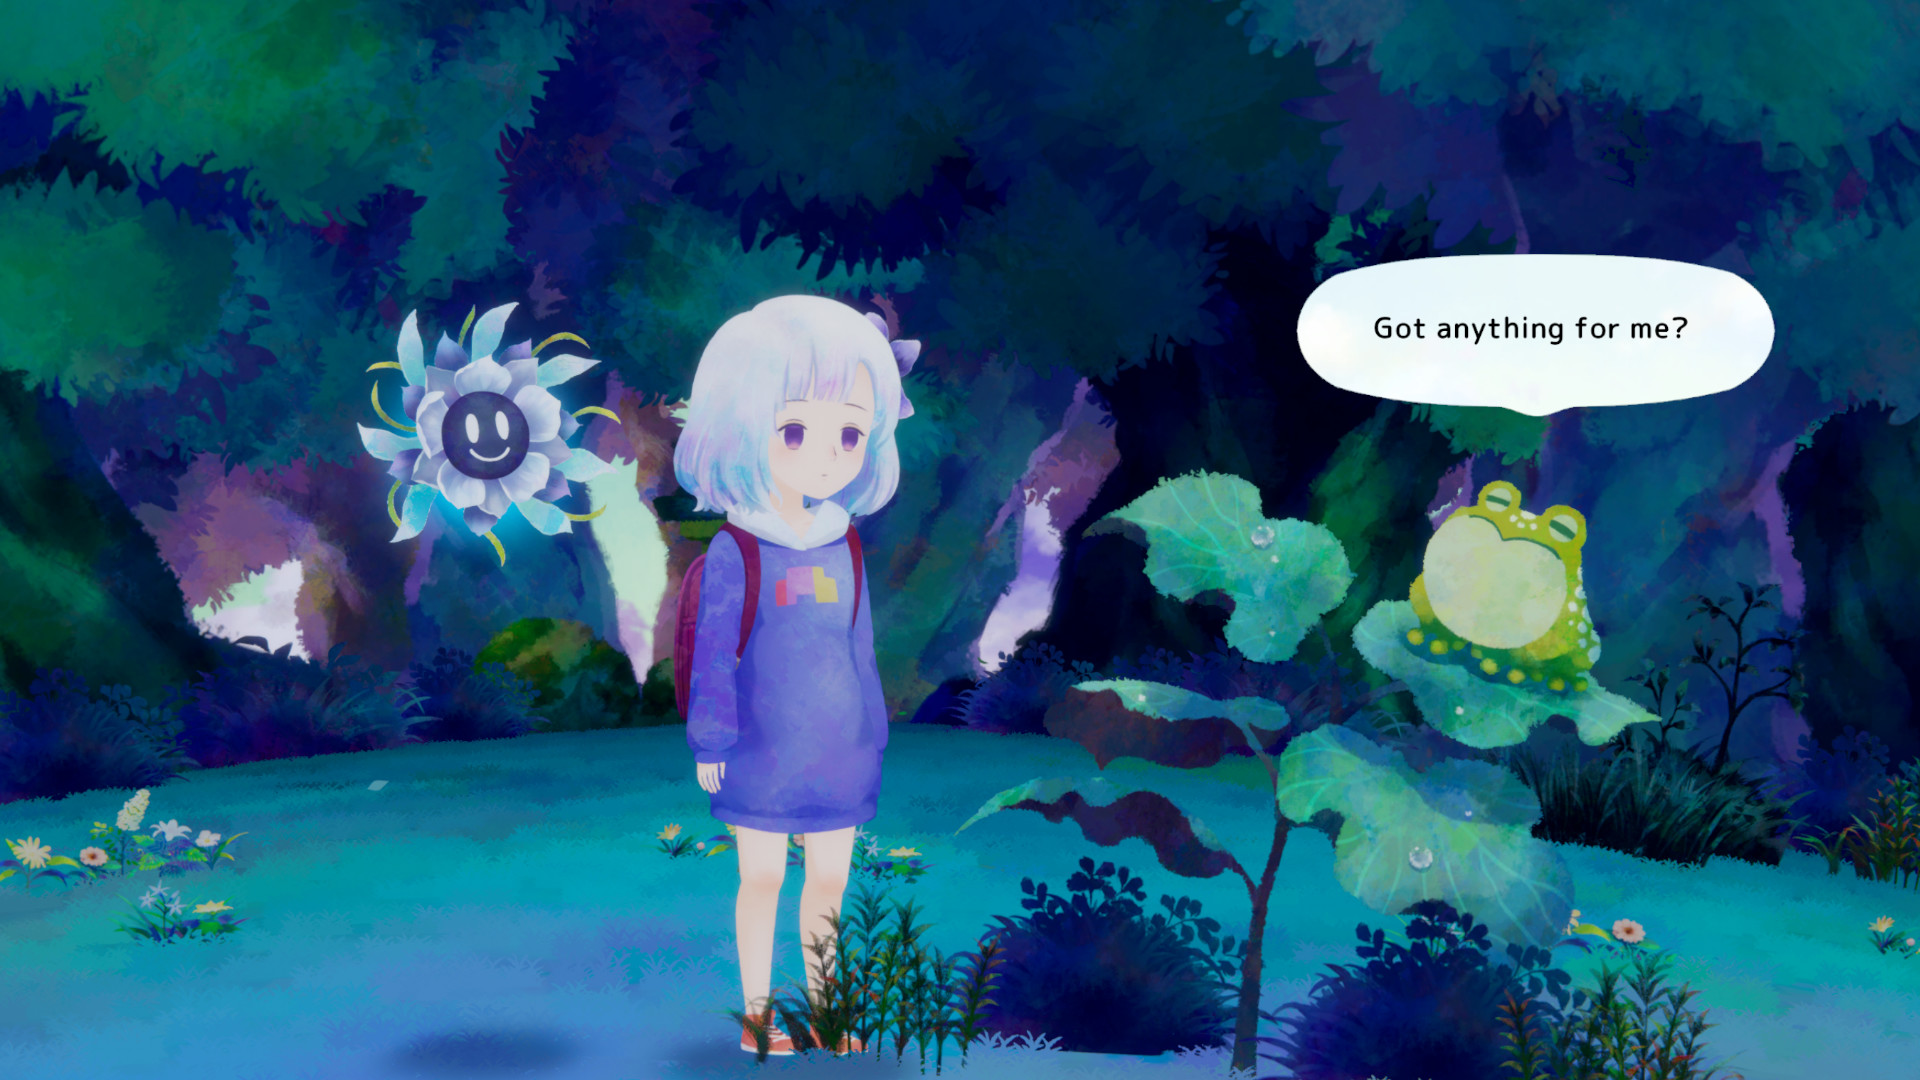 Screenshot from Sumire of Sumi and Flower talking to a frog in the woods